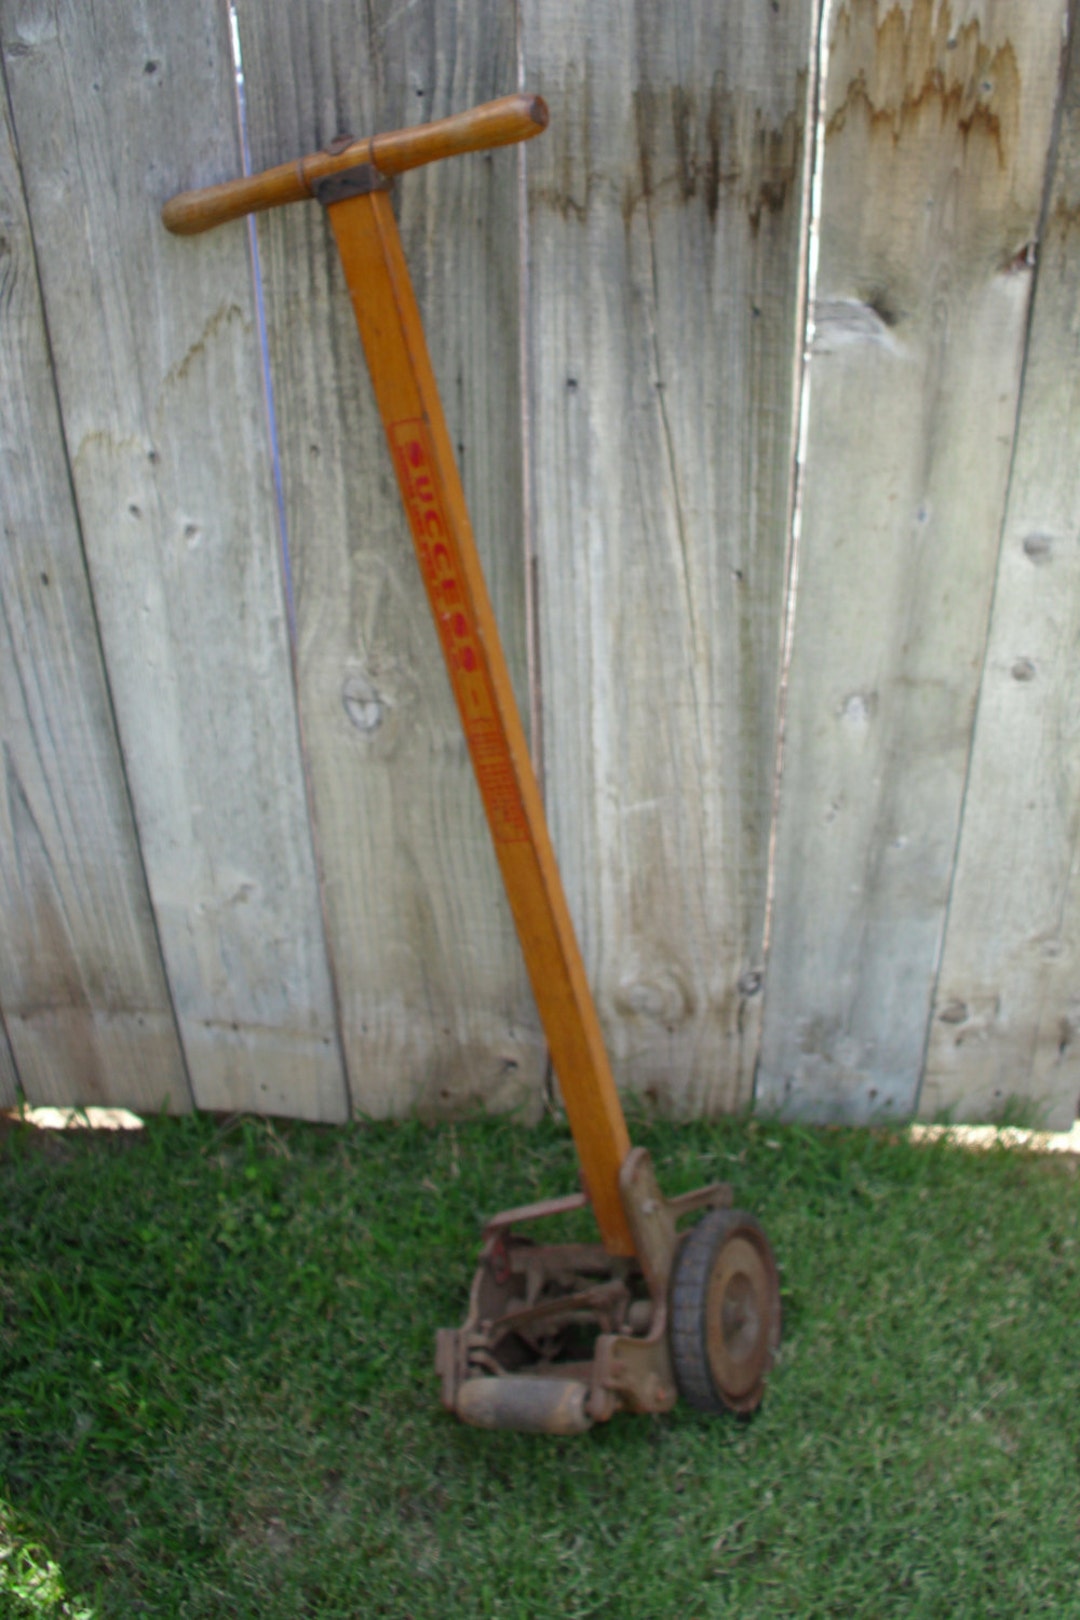 Making Room All Offers Welcome Vintage Lawnmower Edger // American